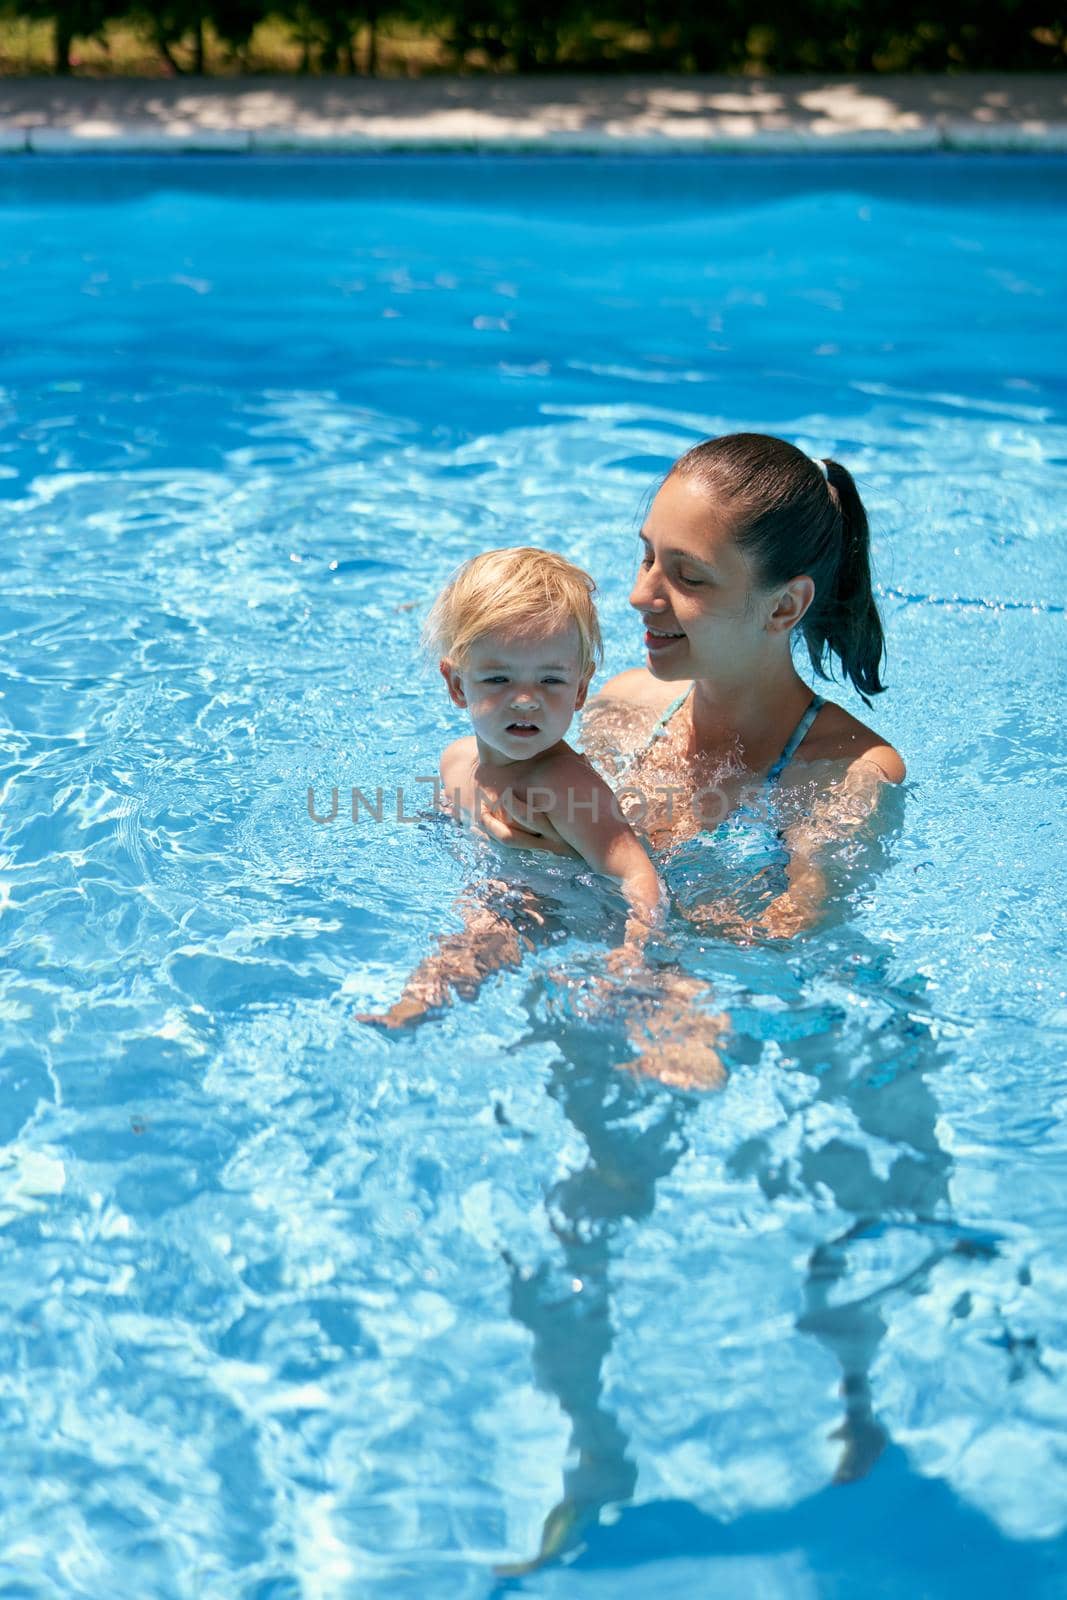 Mom with a small baby in the pool. High quality photo